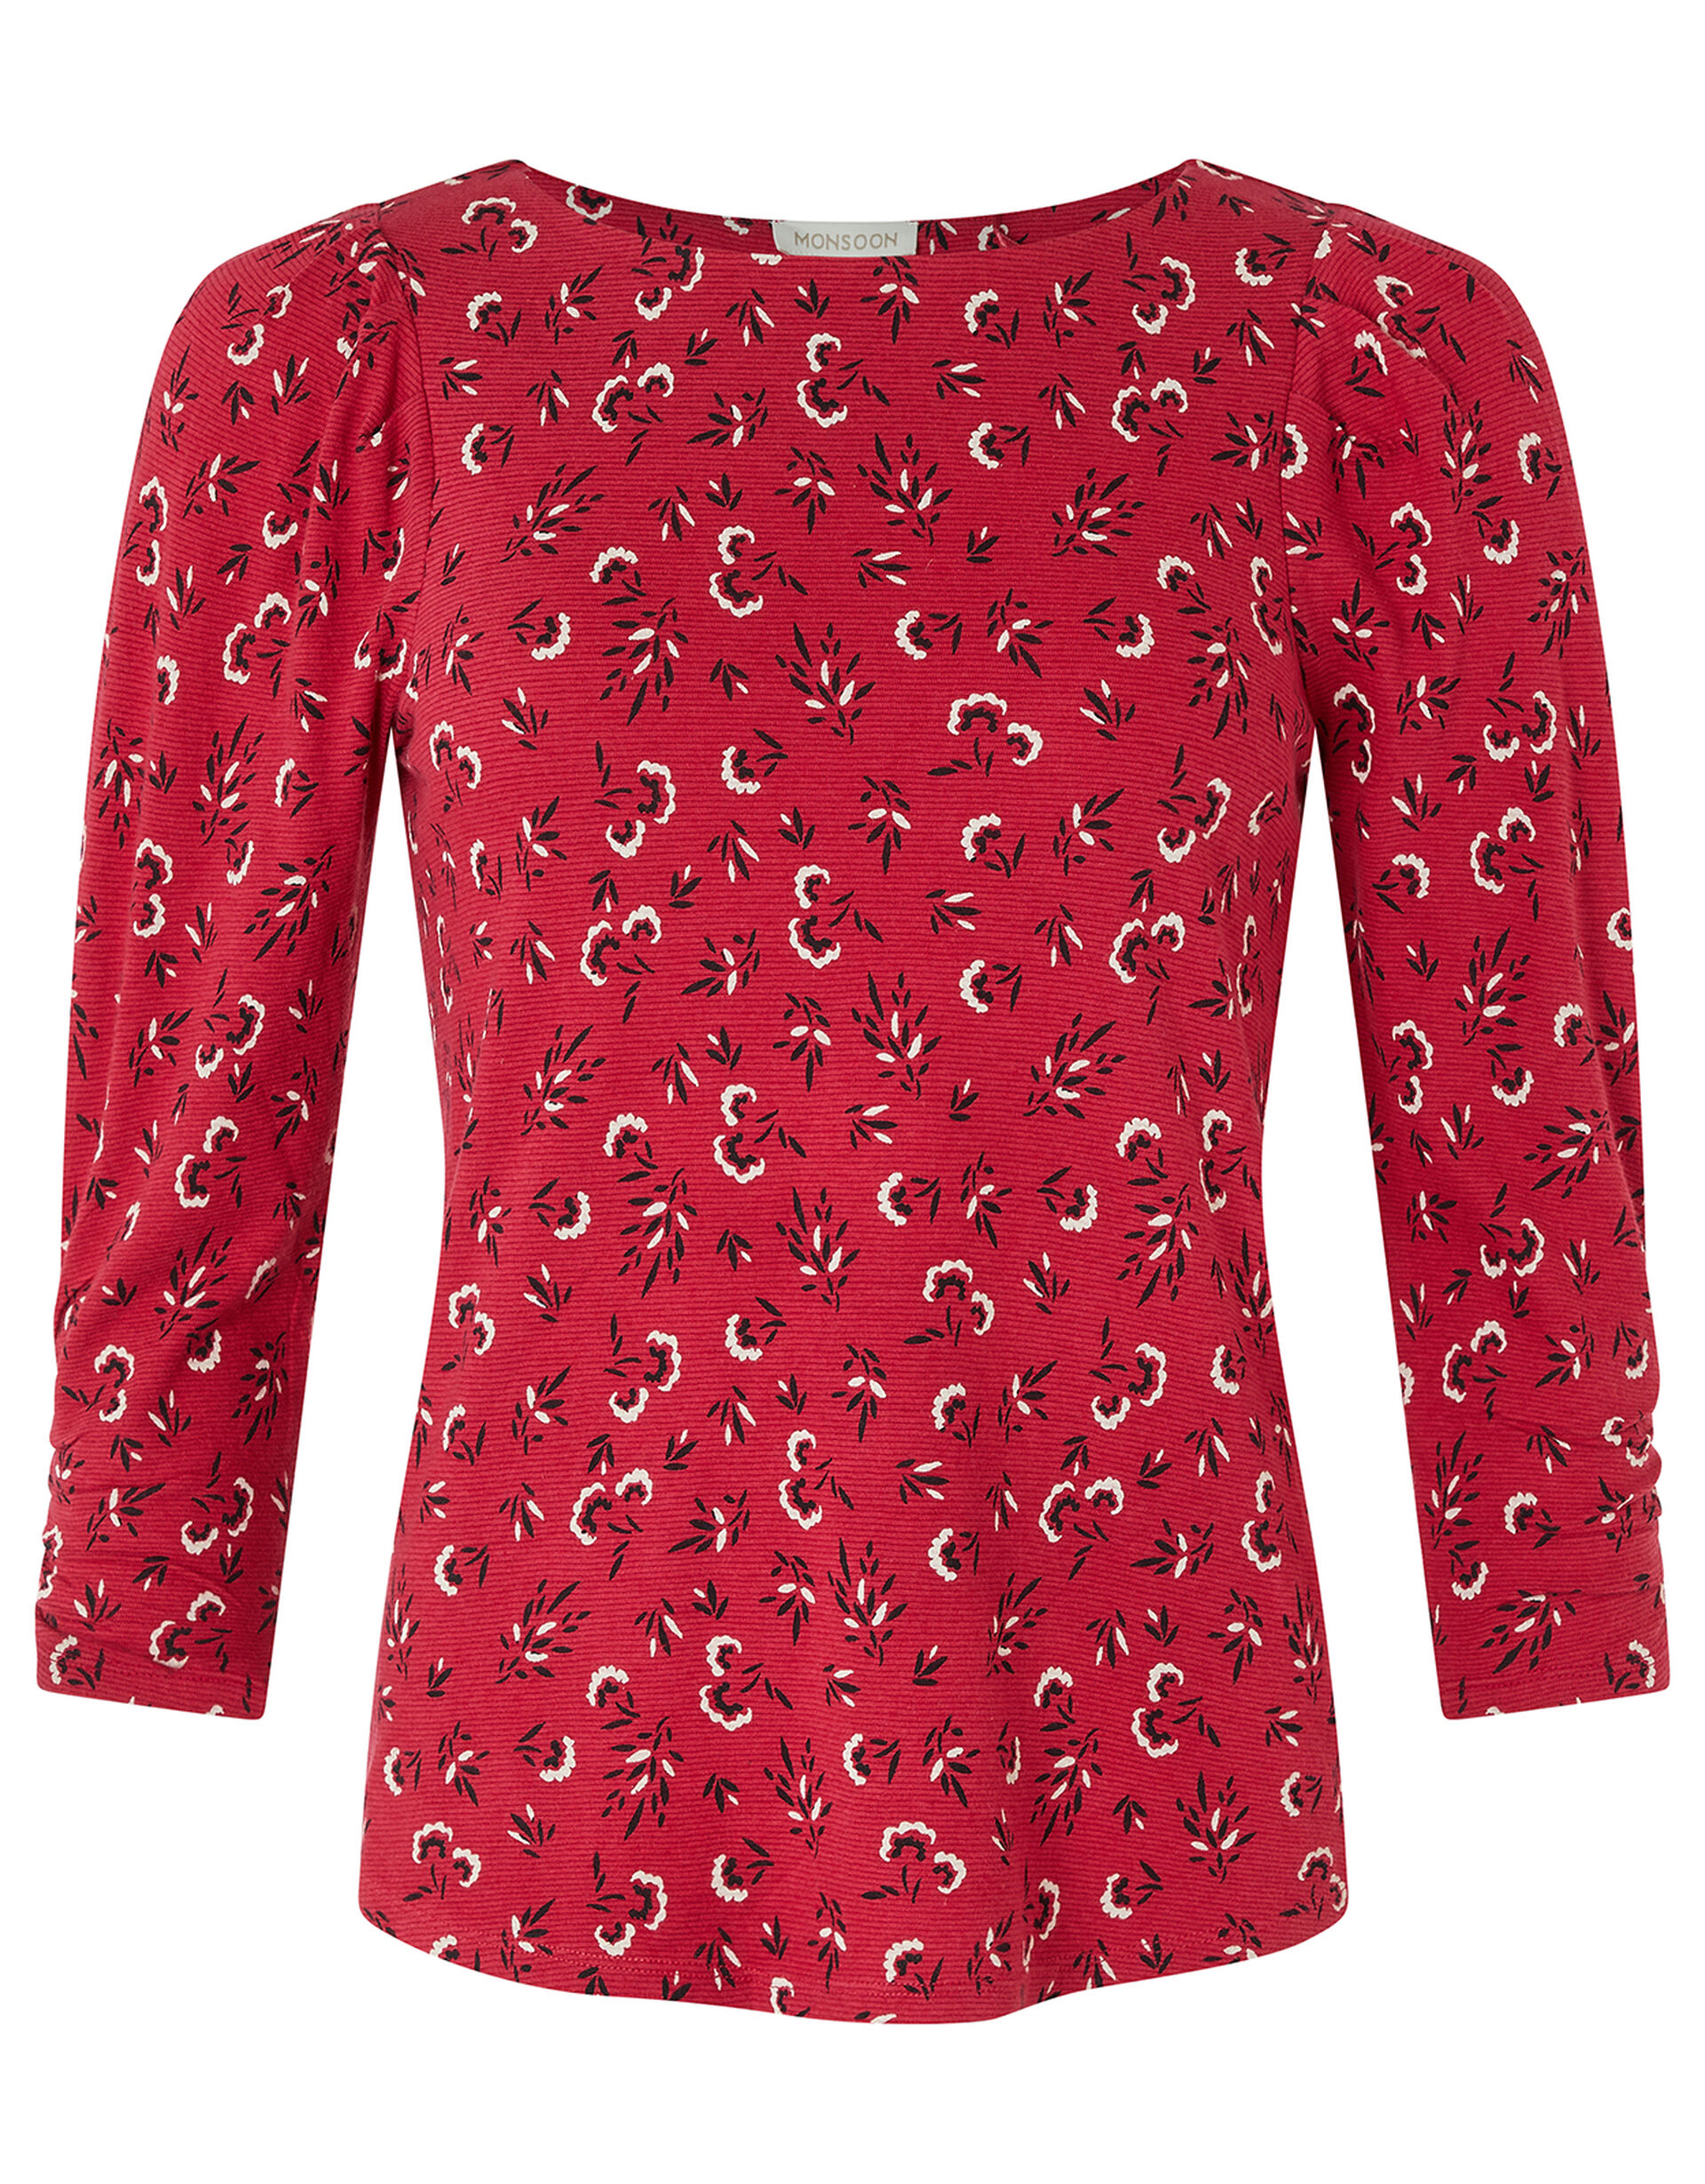 Dua Ditsy Floral Top with Organic Cotton, Red (RED), large